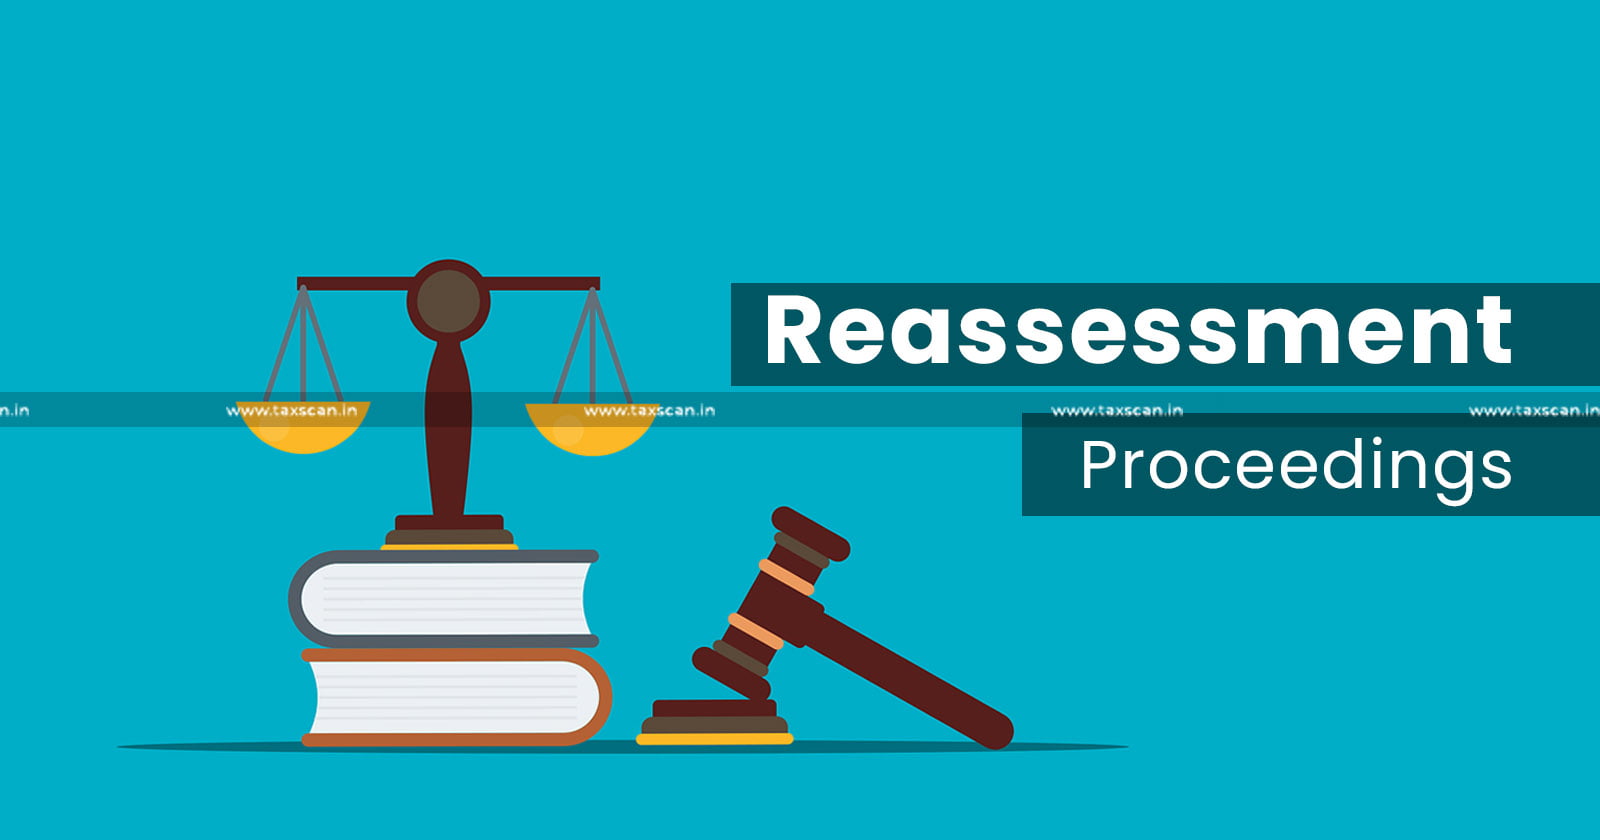 Reassessment Proceedings can be Triggered - Reassessment Proceedings - Income Tax Act - Delhi High Court - Income Tax - Income Tax Act has been issued and served - TAXSCAN